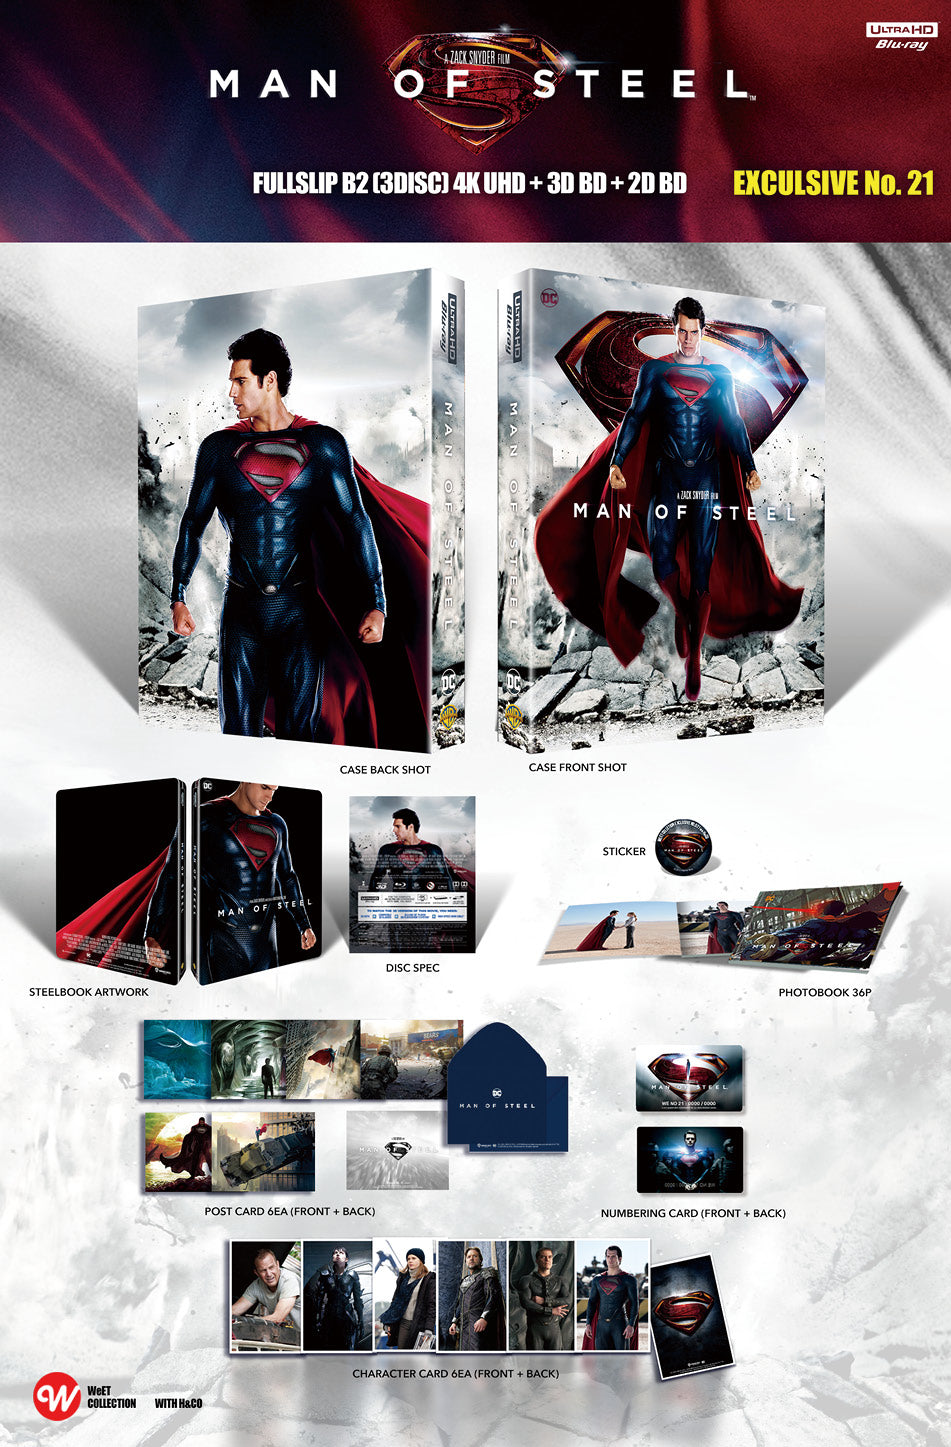 Man Of Steel 4K Blu-ray Steelbook WeET Collection Exclusive #21 One Click Box Set